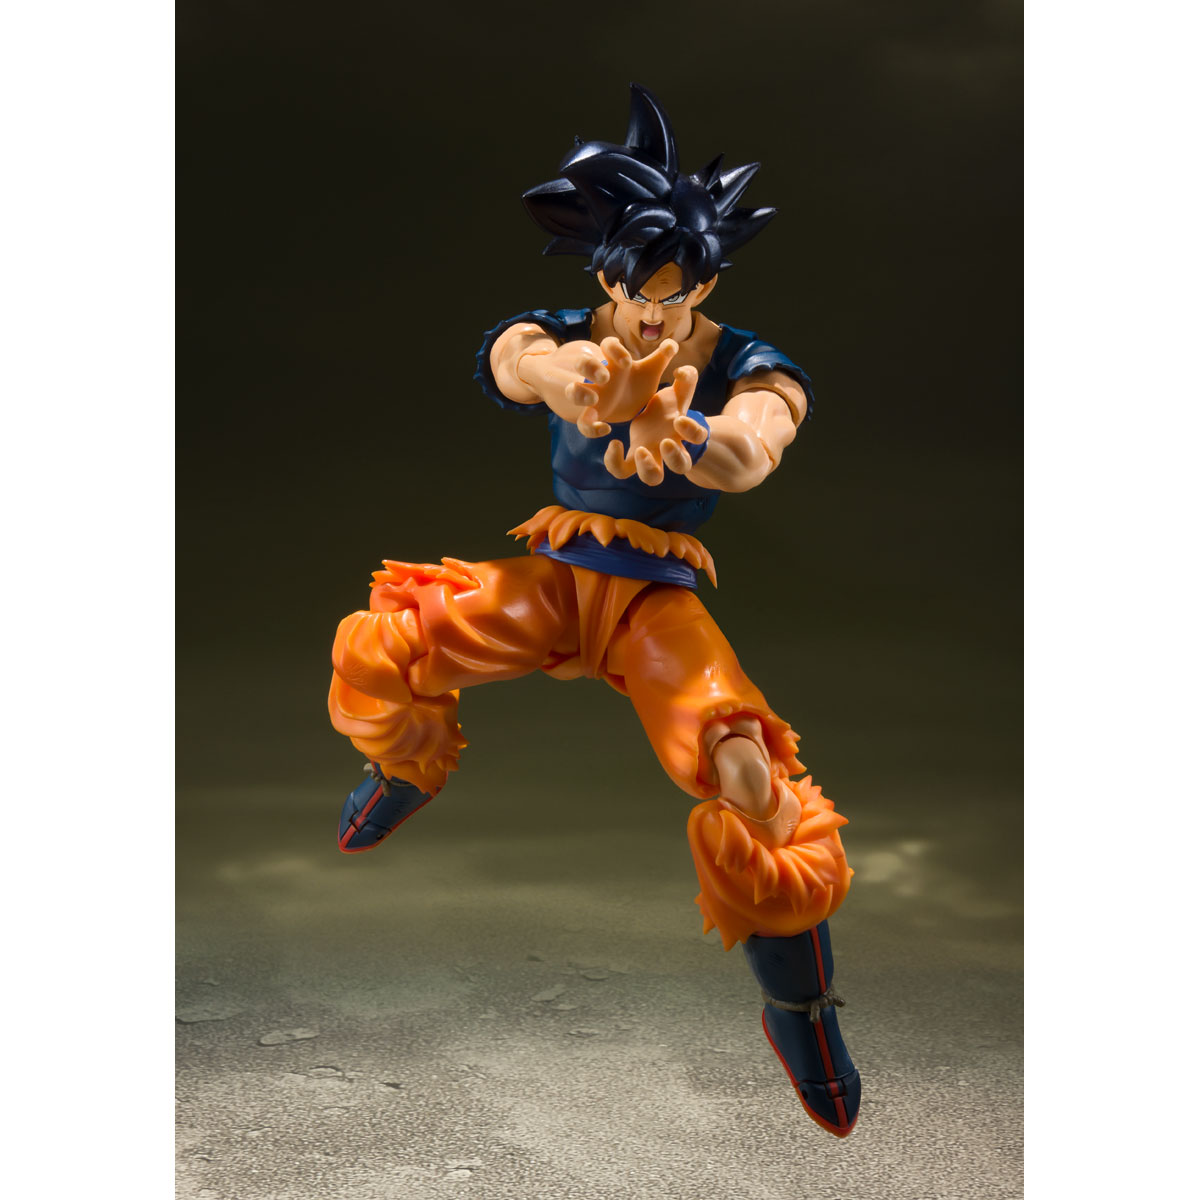 S H Figuarts Son Goku Ultra Instinct Sign Event Exclusive Color Edition Dragon Ball Premium Bandai Usa Online Store For Action Figures Model Kits Toys And More